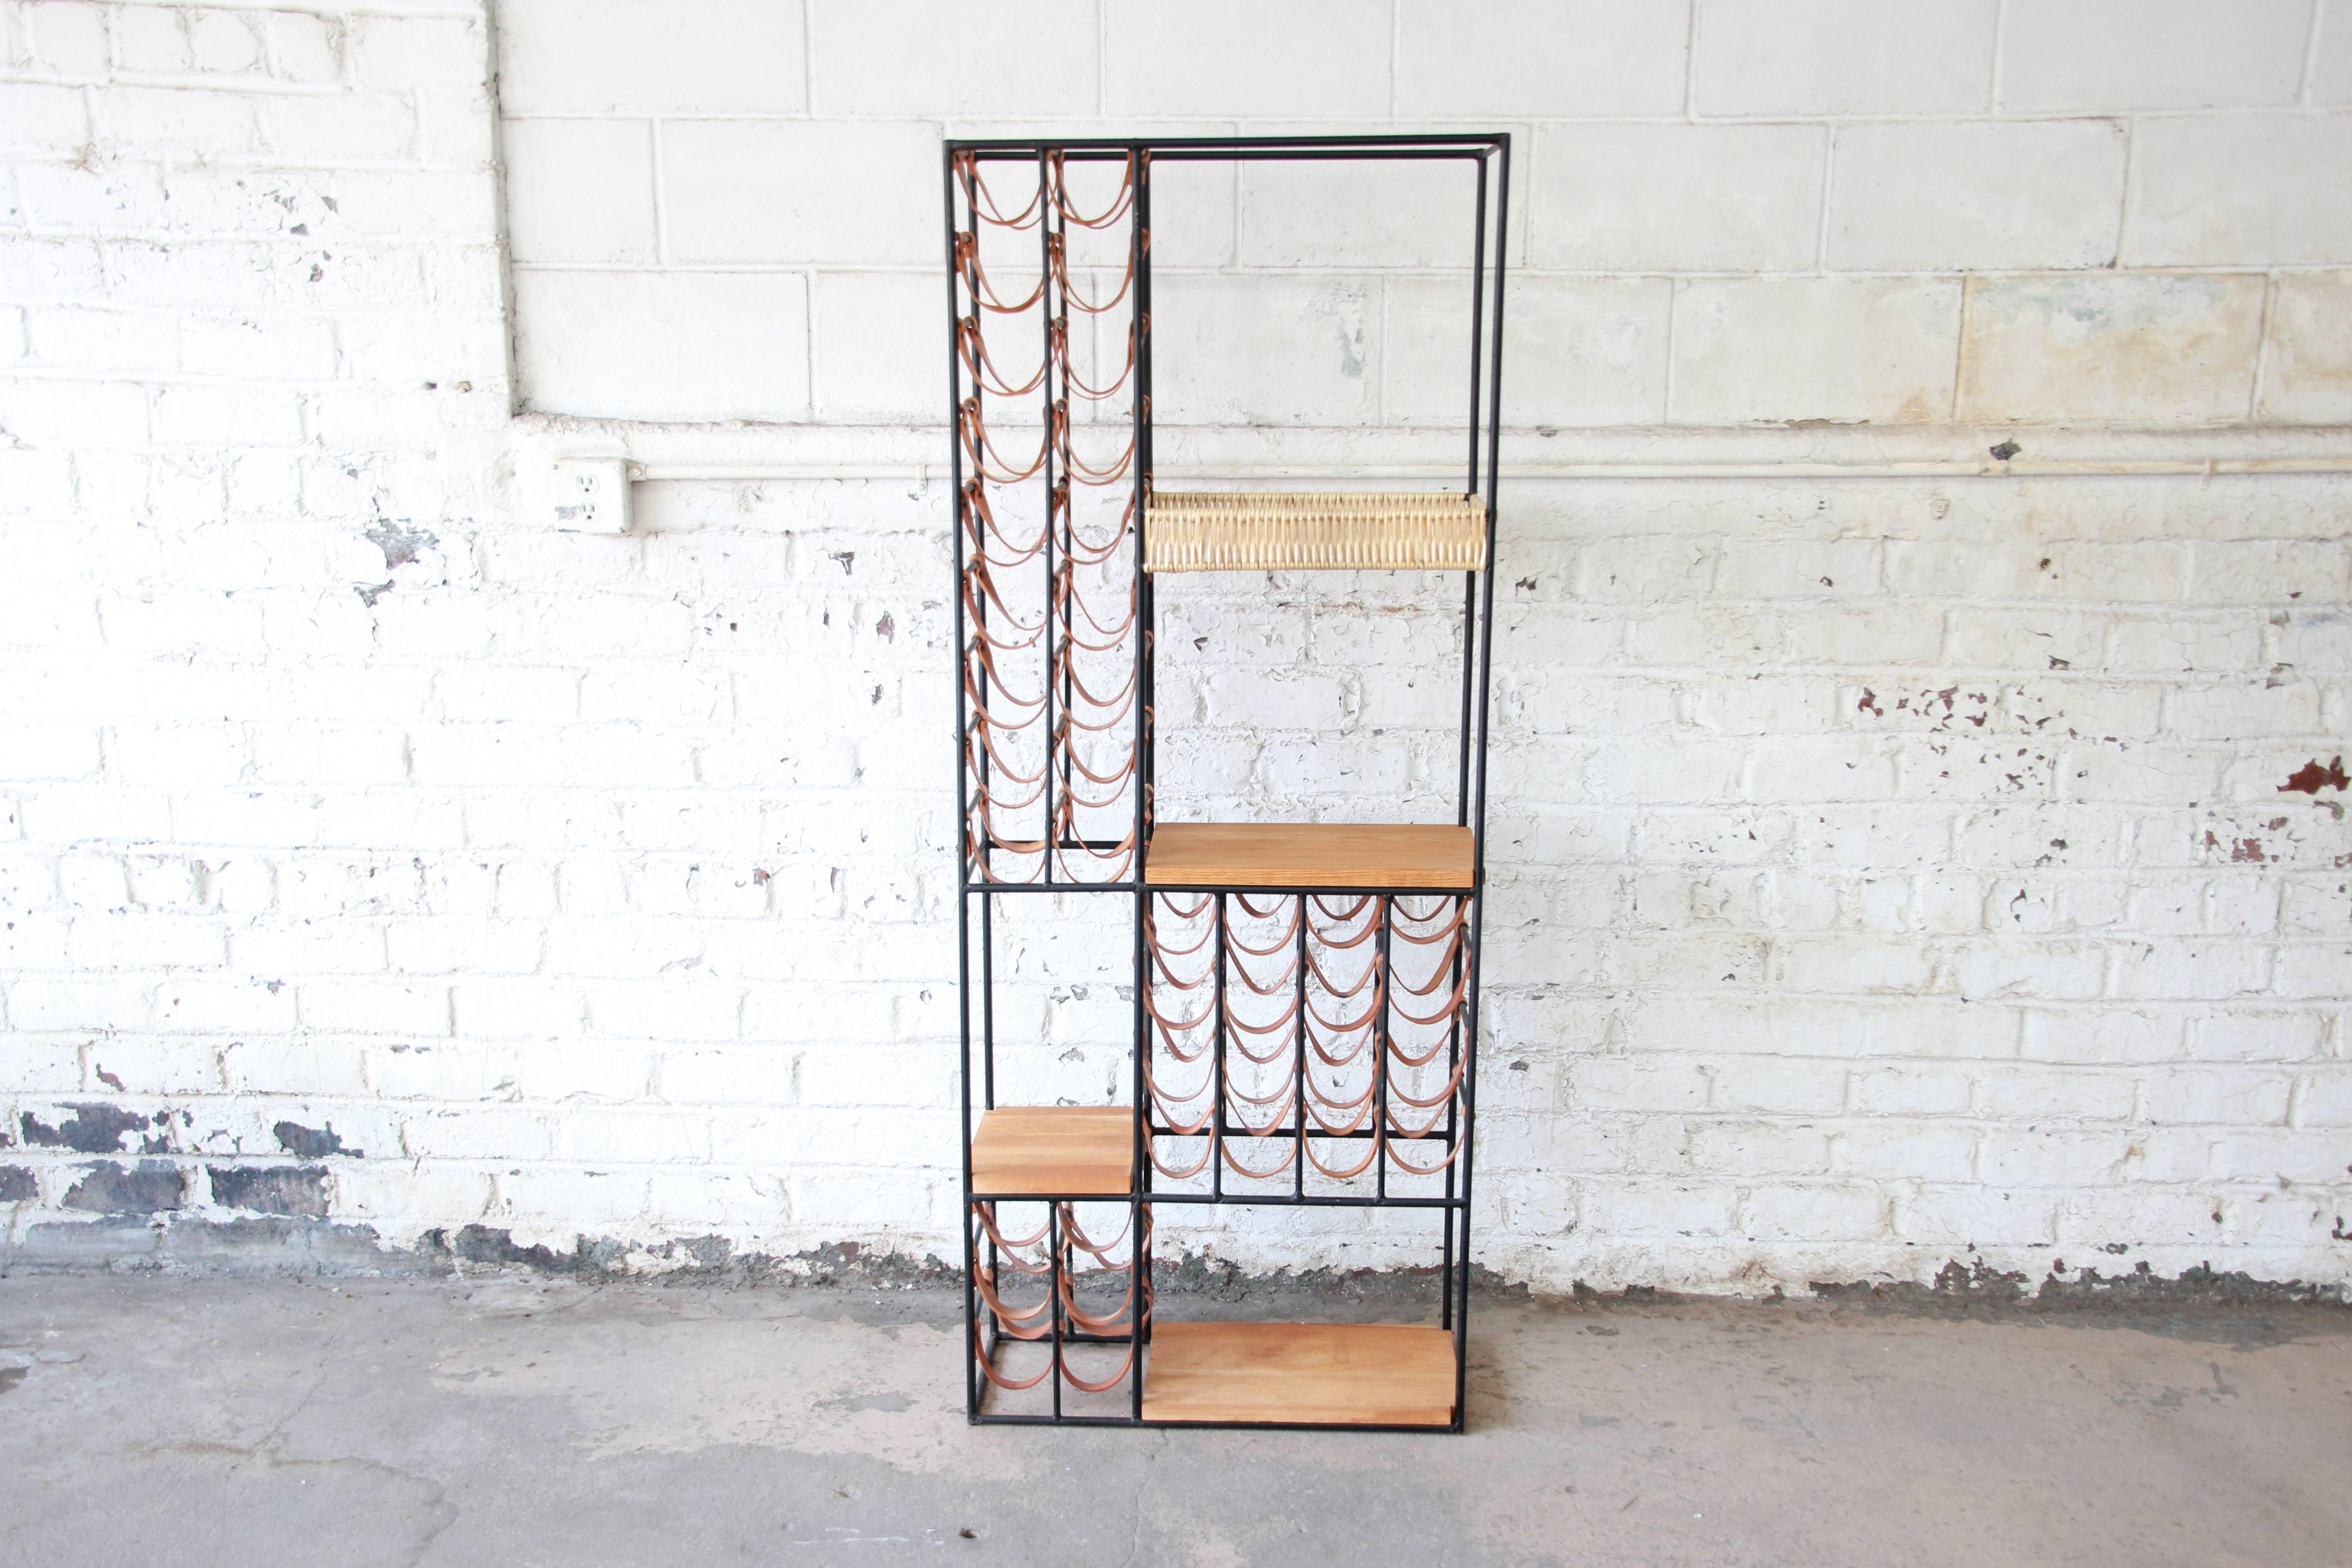 An exceptional and rare 40-bottle wine rack designed in 1954 by Arthur Umanoff for Shaver Howard. The rack features an iron frame with rows of leather slings for holding wine bottles. It has three butcher-block shelves of solid wood, as well as a